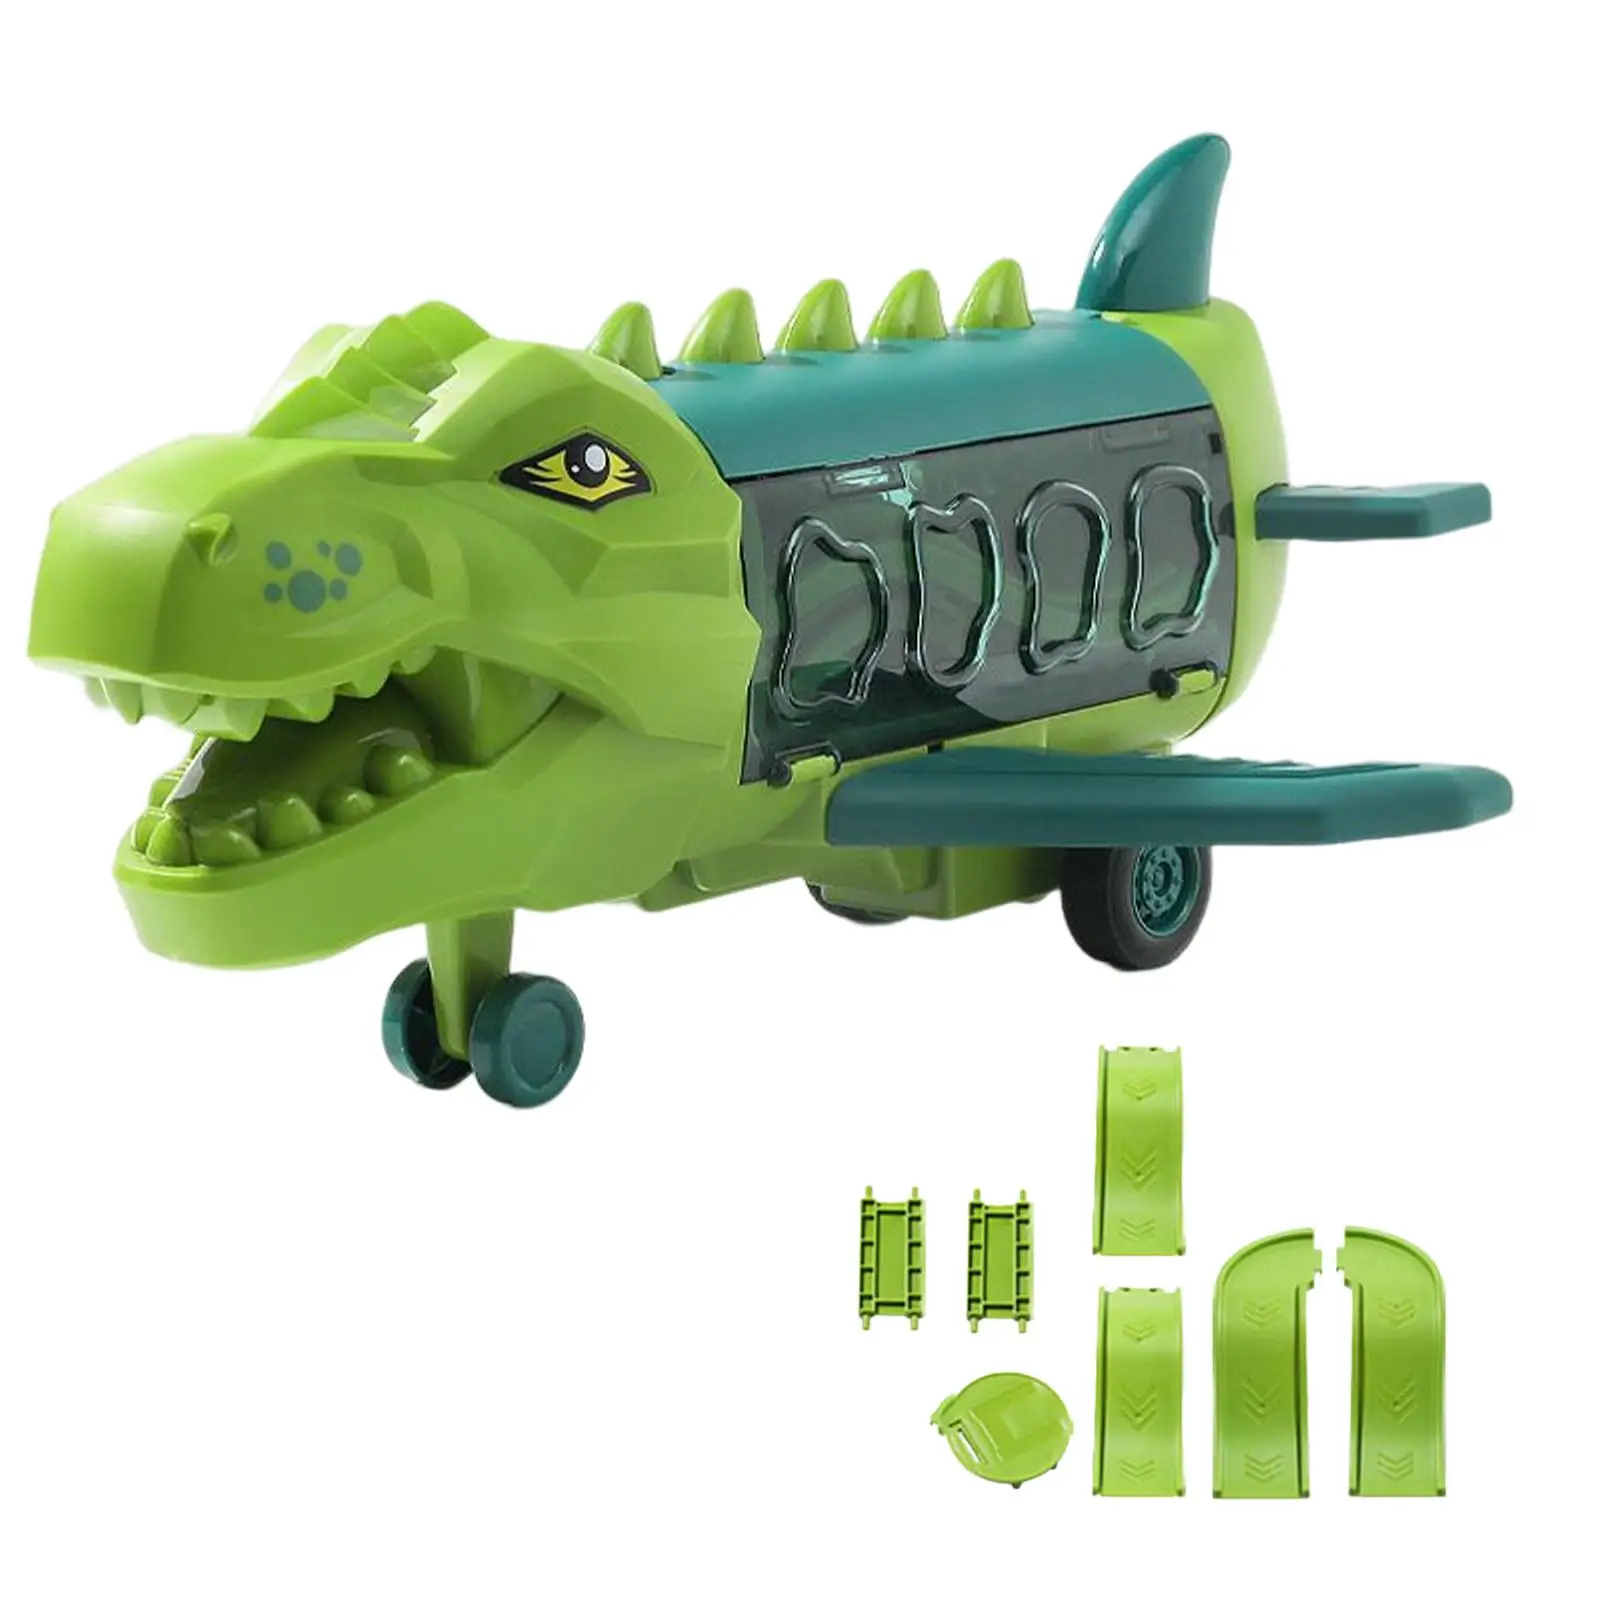 Dinosaur Carrier Pull Back Dinosaur Car Transporter Toy for Kids Boys And Preschool Children Ages 3 4 5 Years Old